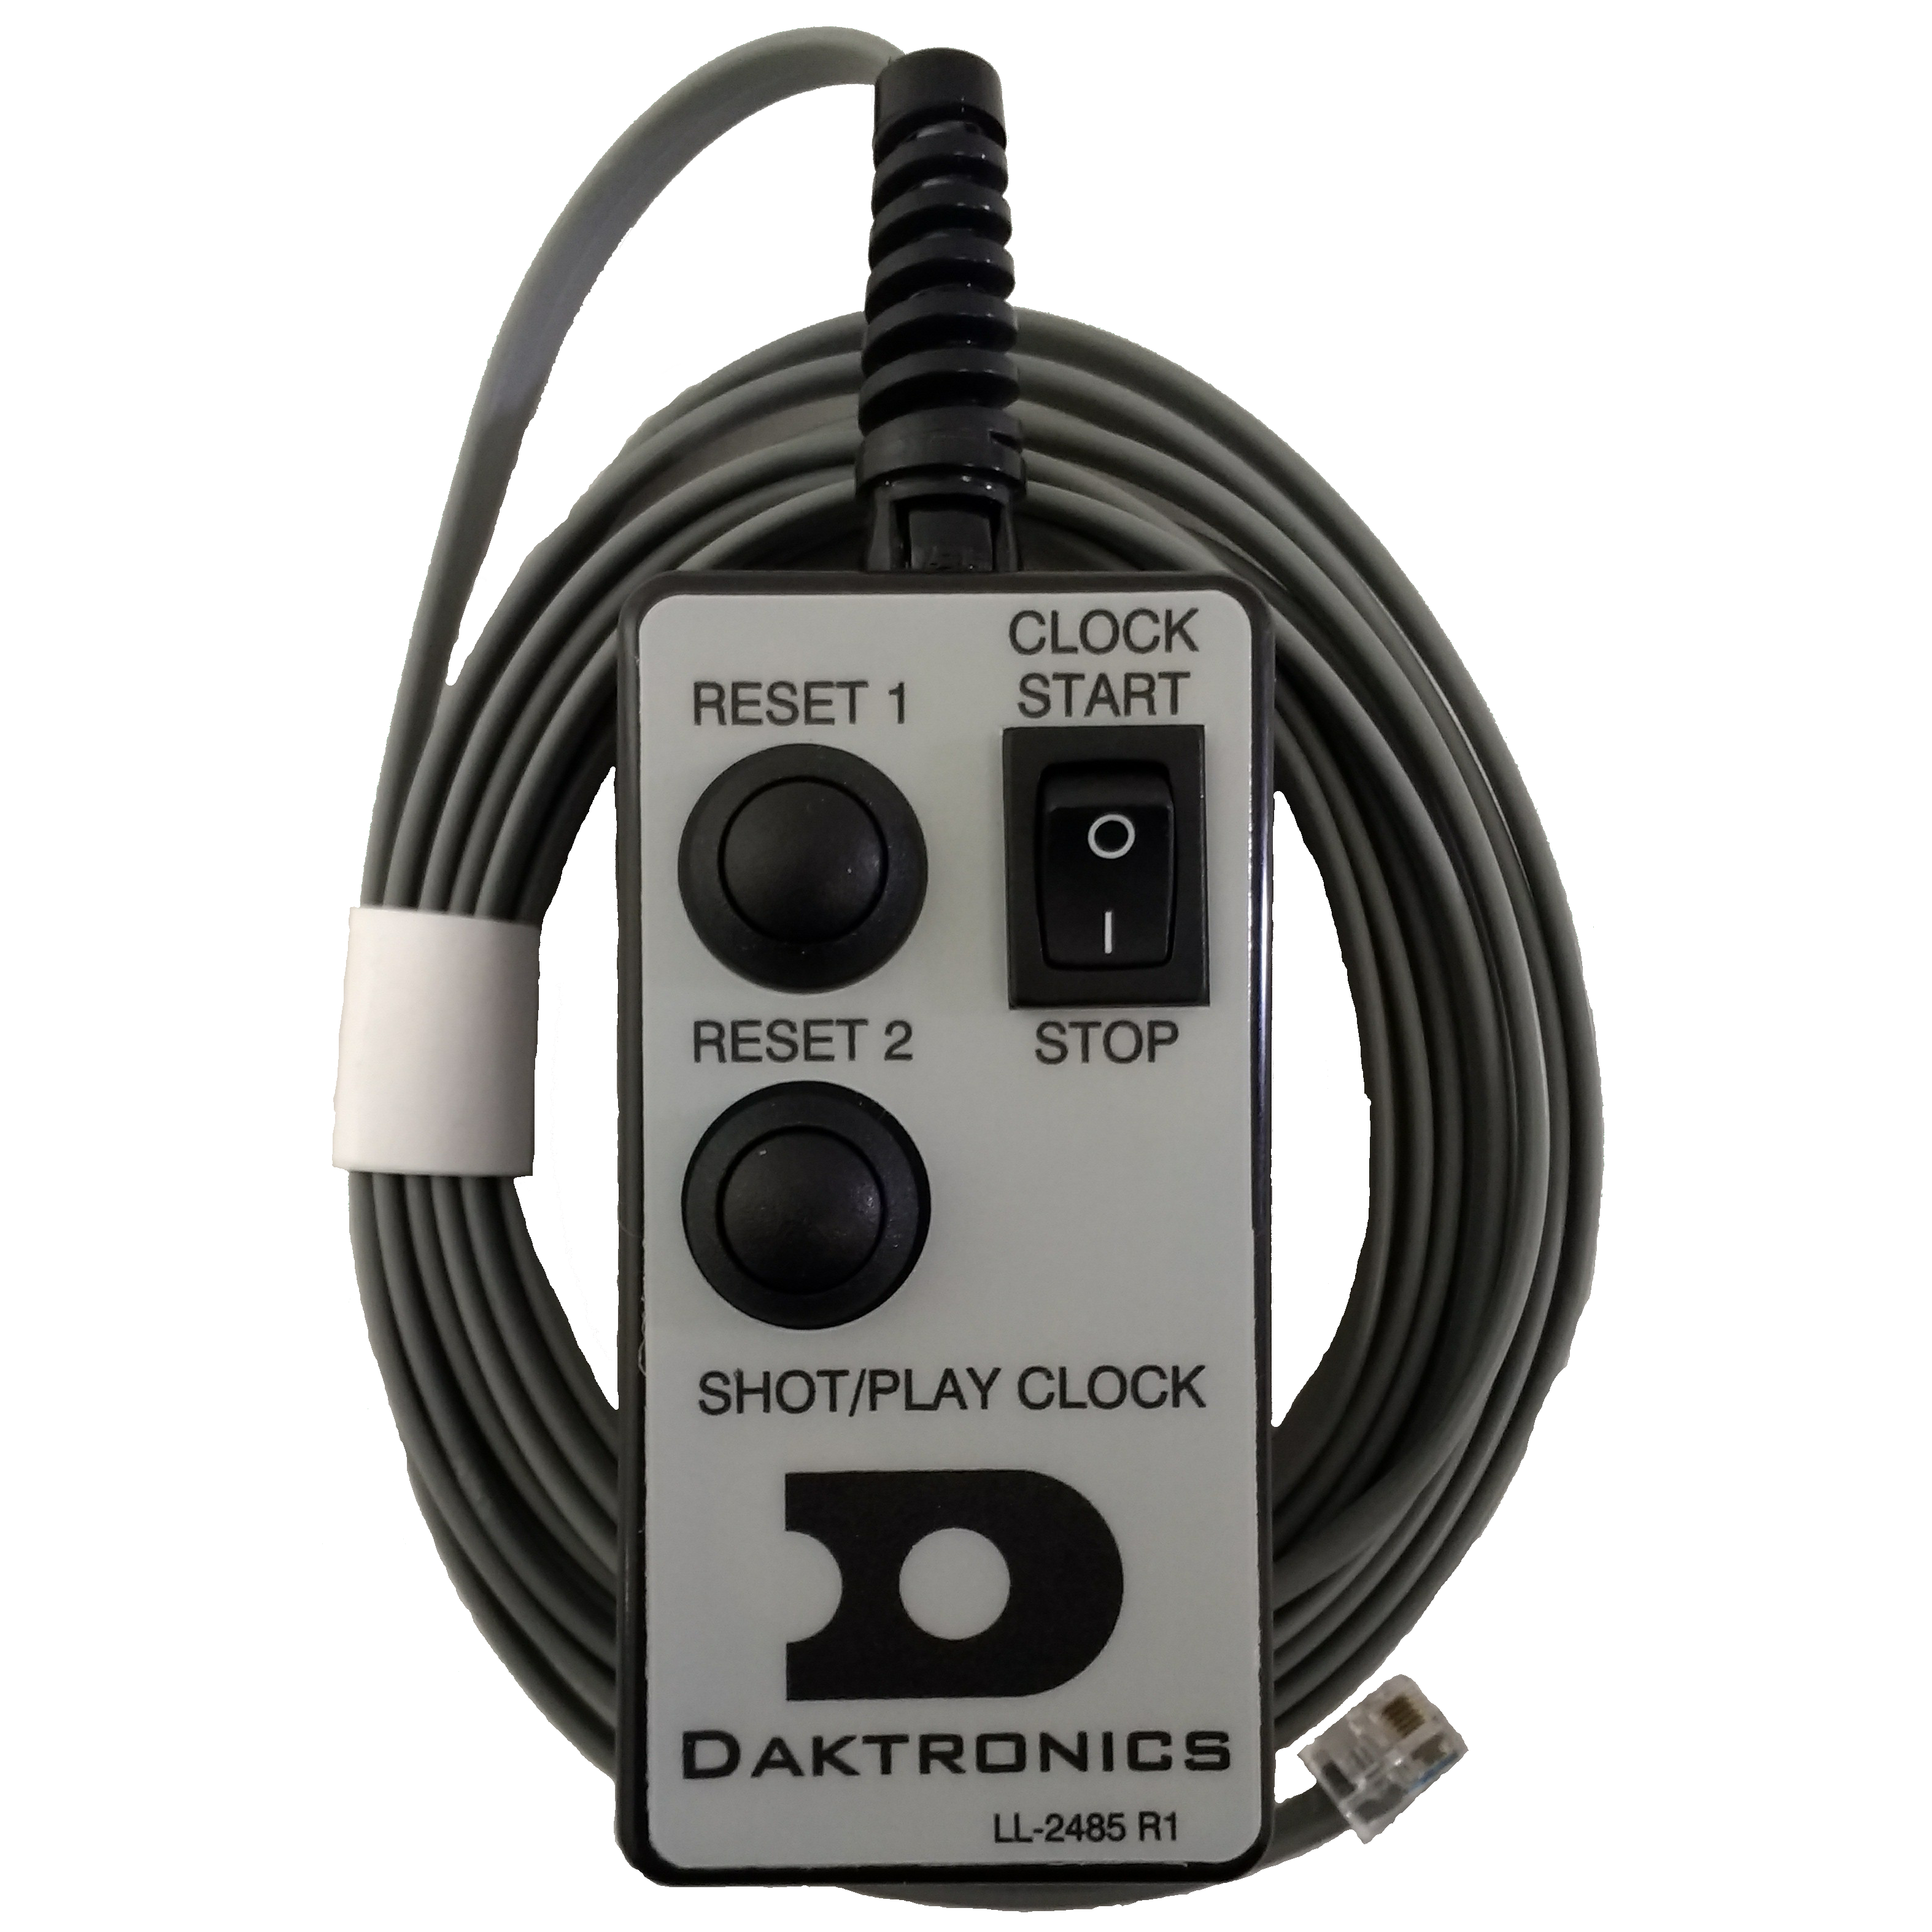 (0A-1196-0031) Daktronics Remote Start/Stop Double Reset Switch (New)